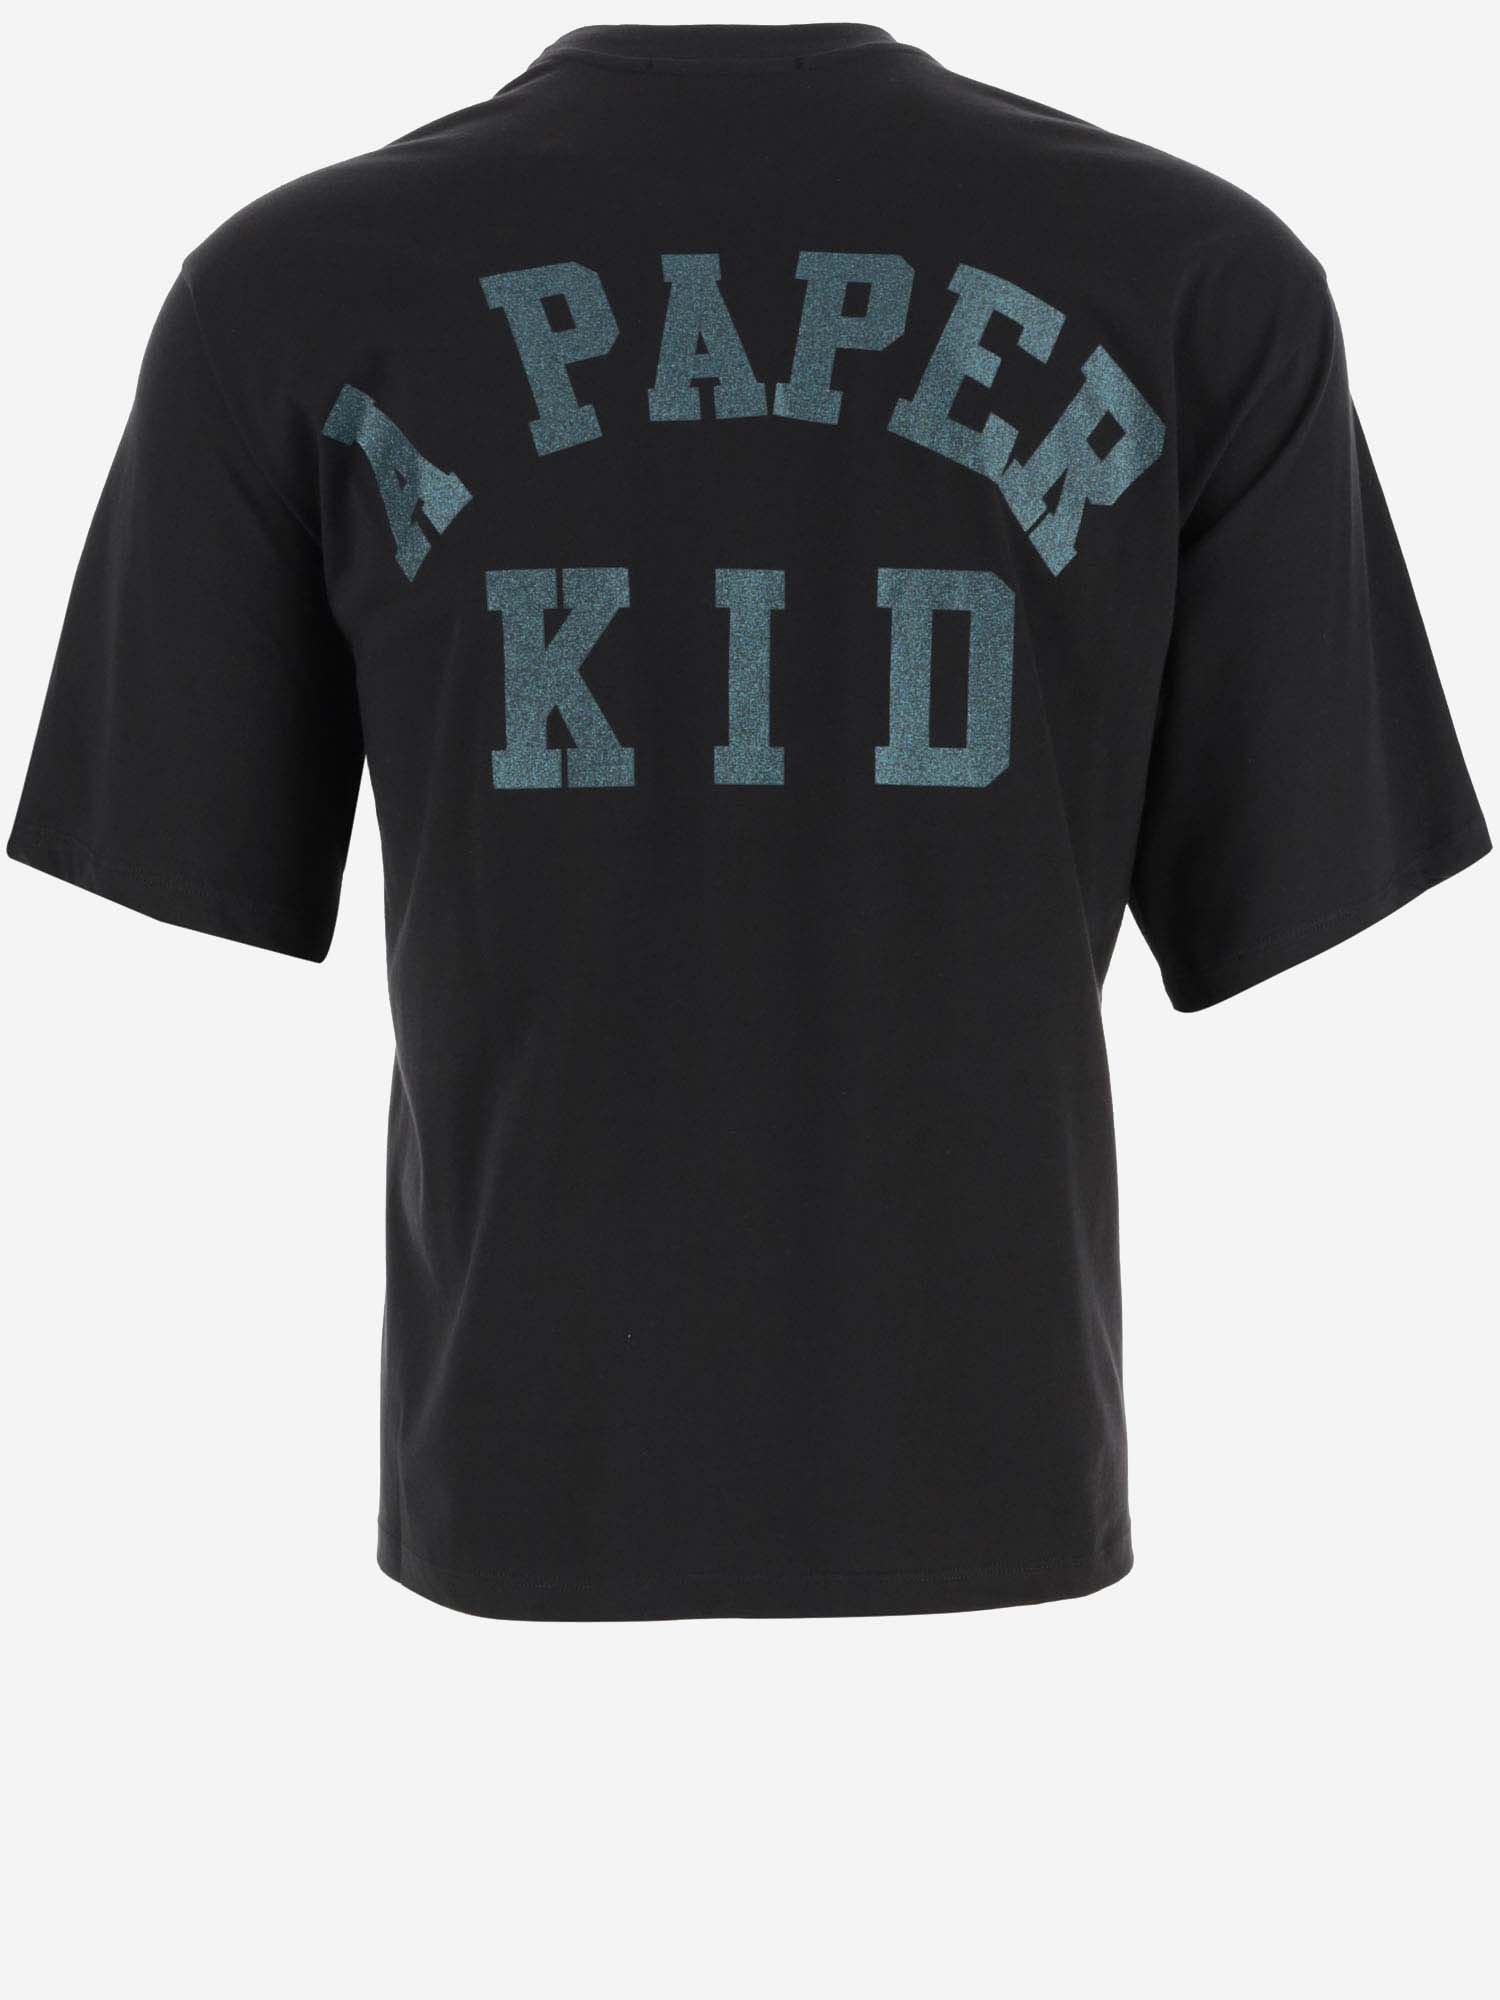 Shop A Paper Kid Cotton T-shirt With Logo In Nero/black